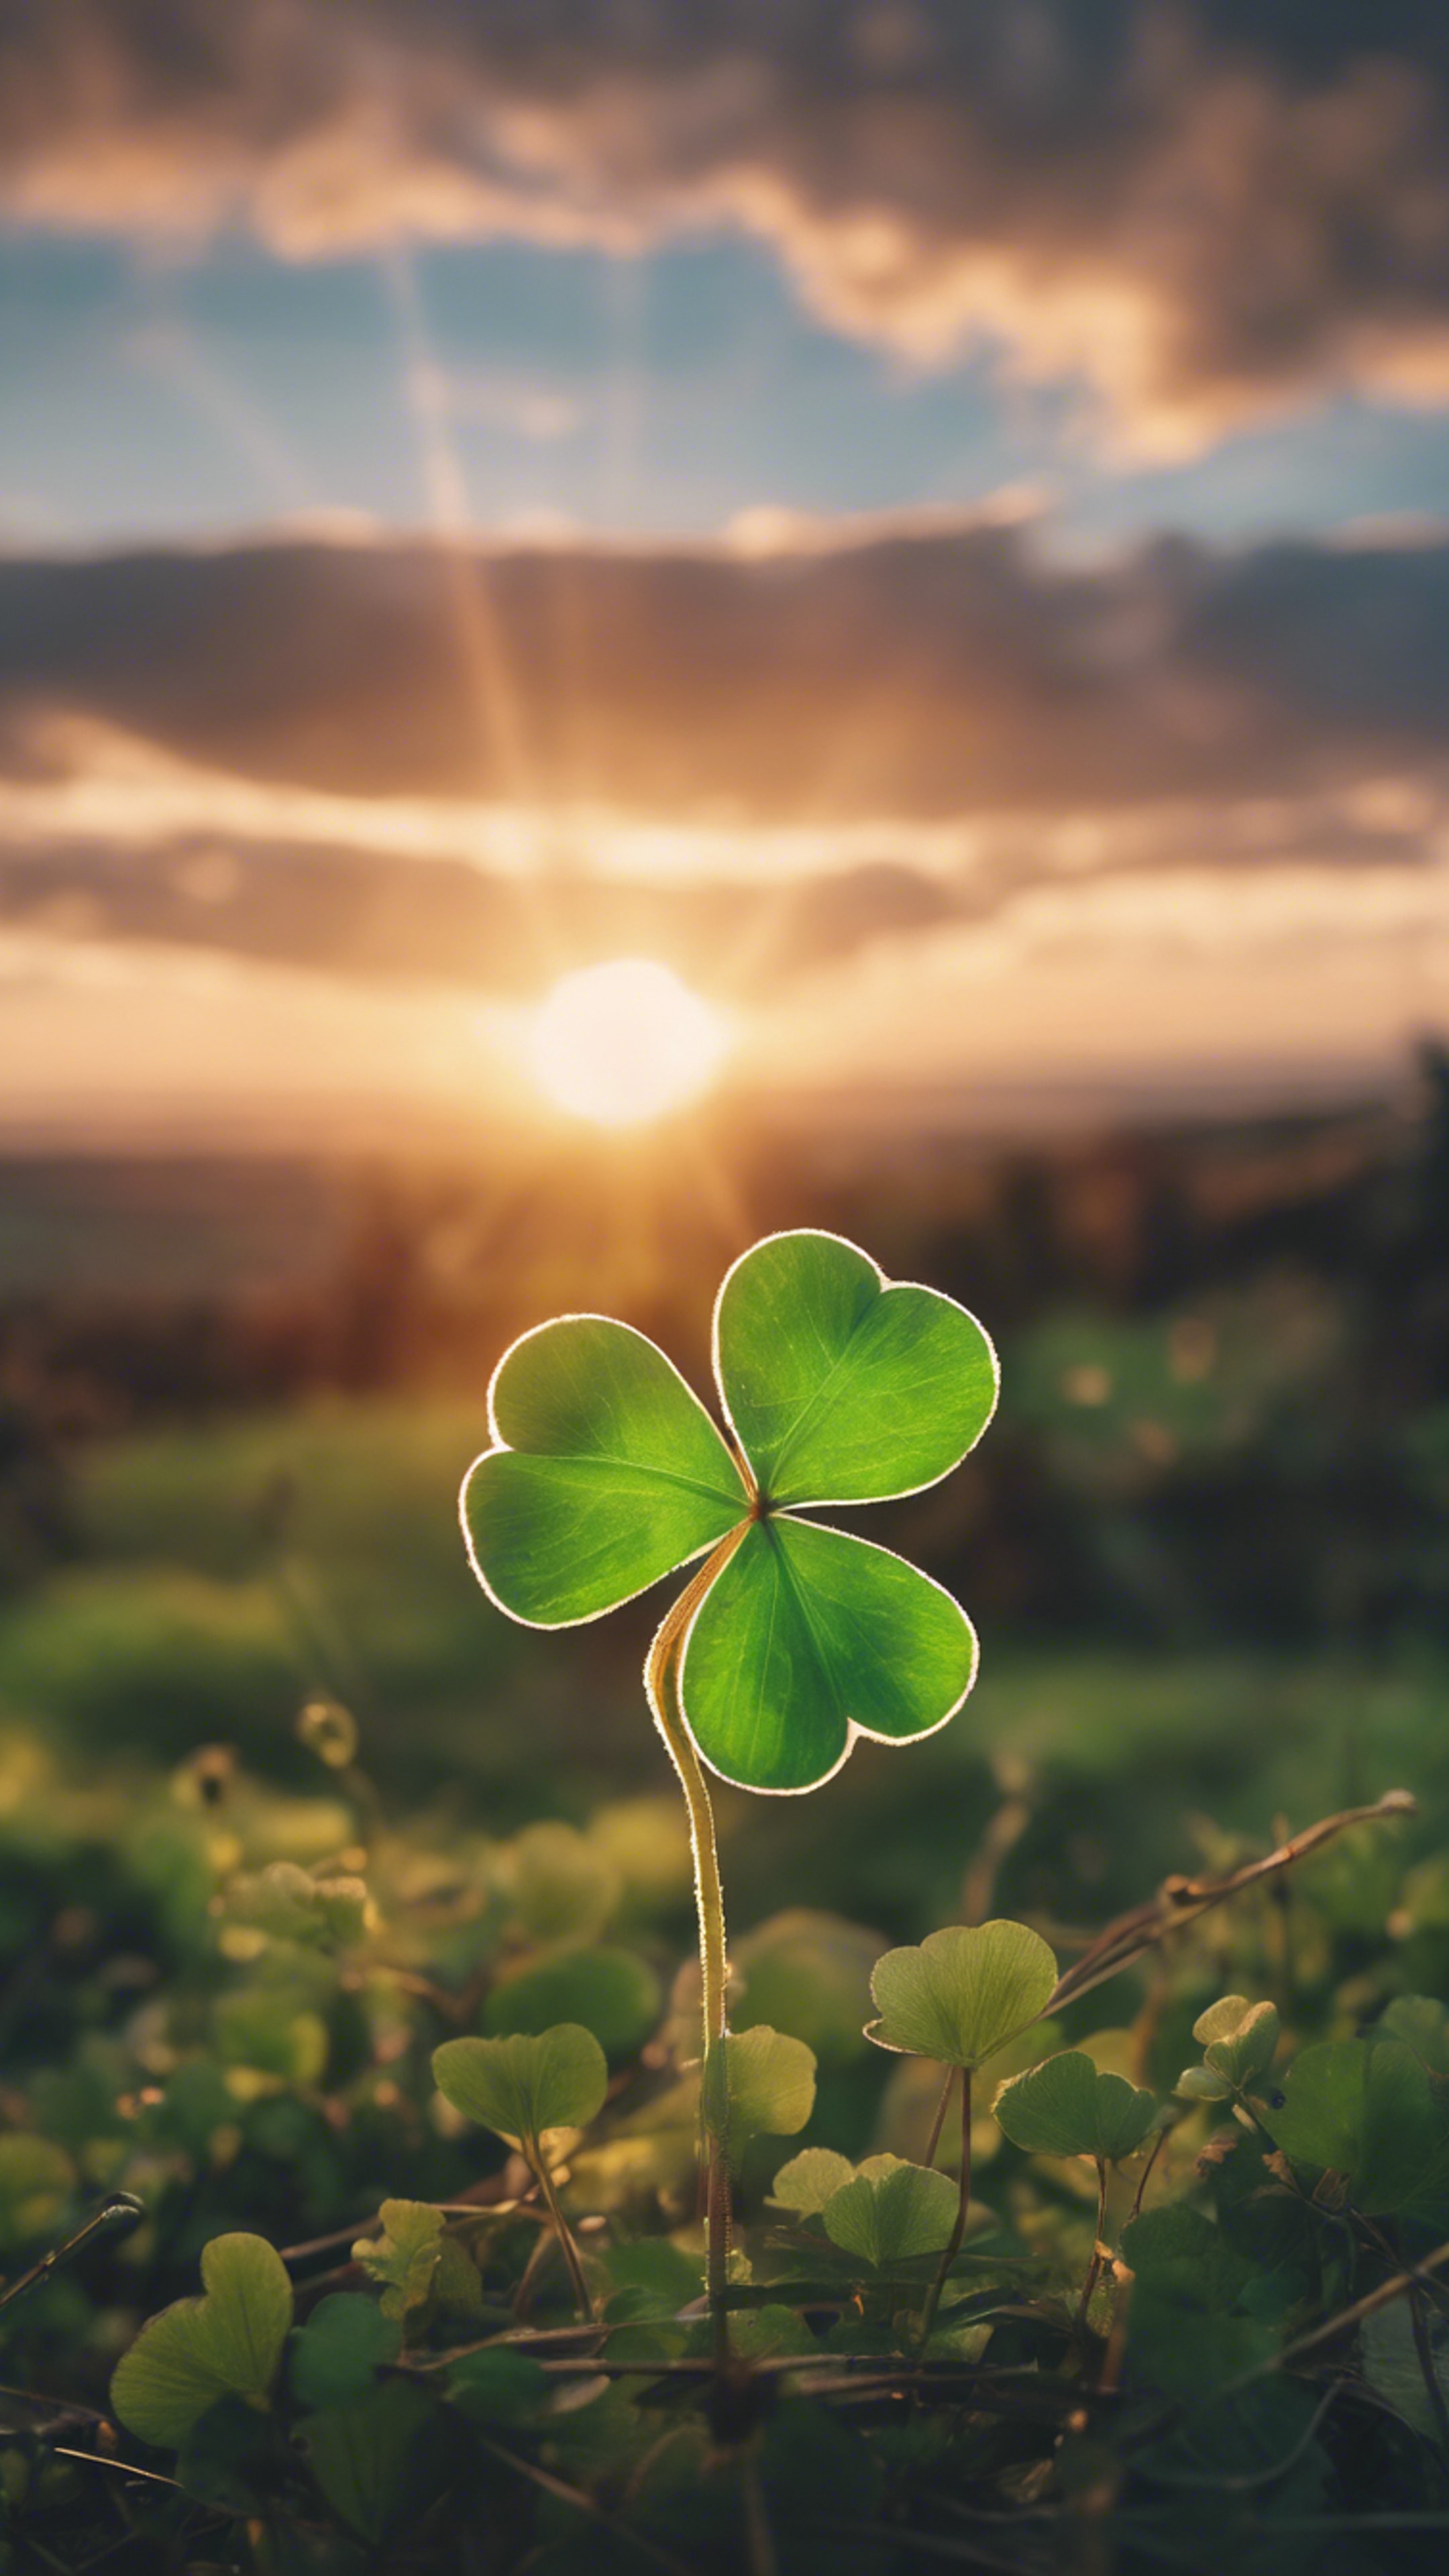 An enchanting sunset over the Irish countryside with a four-leaf clover in the foreground on St. Patrick's Day. Hintergrund[4ad1db603cc8494da5b1]